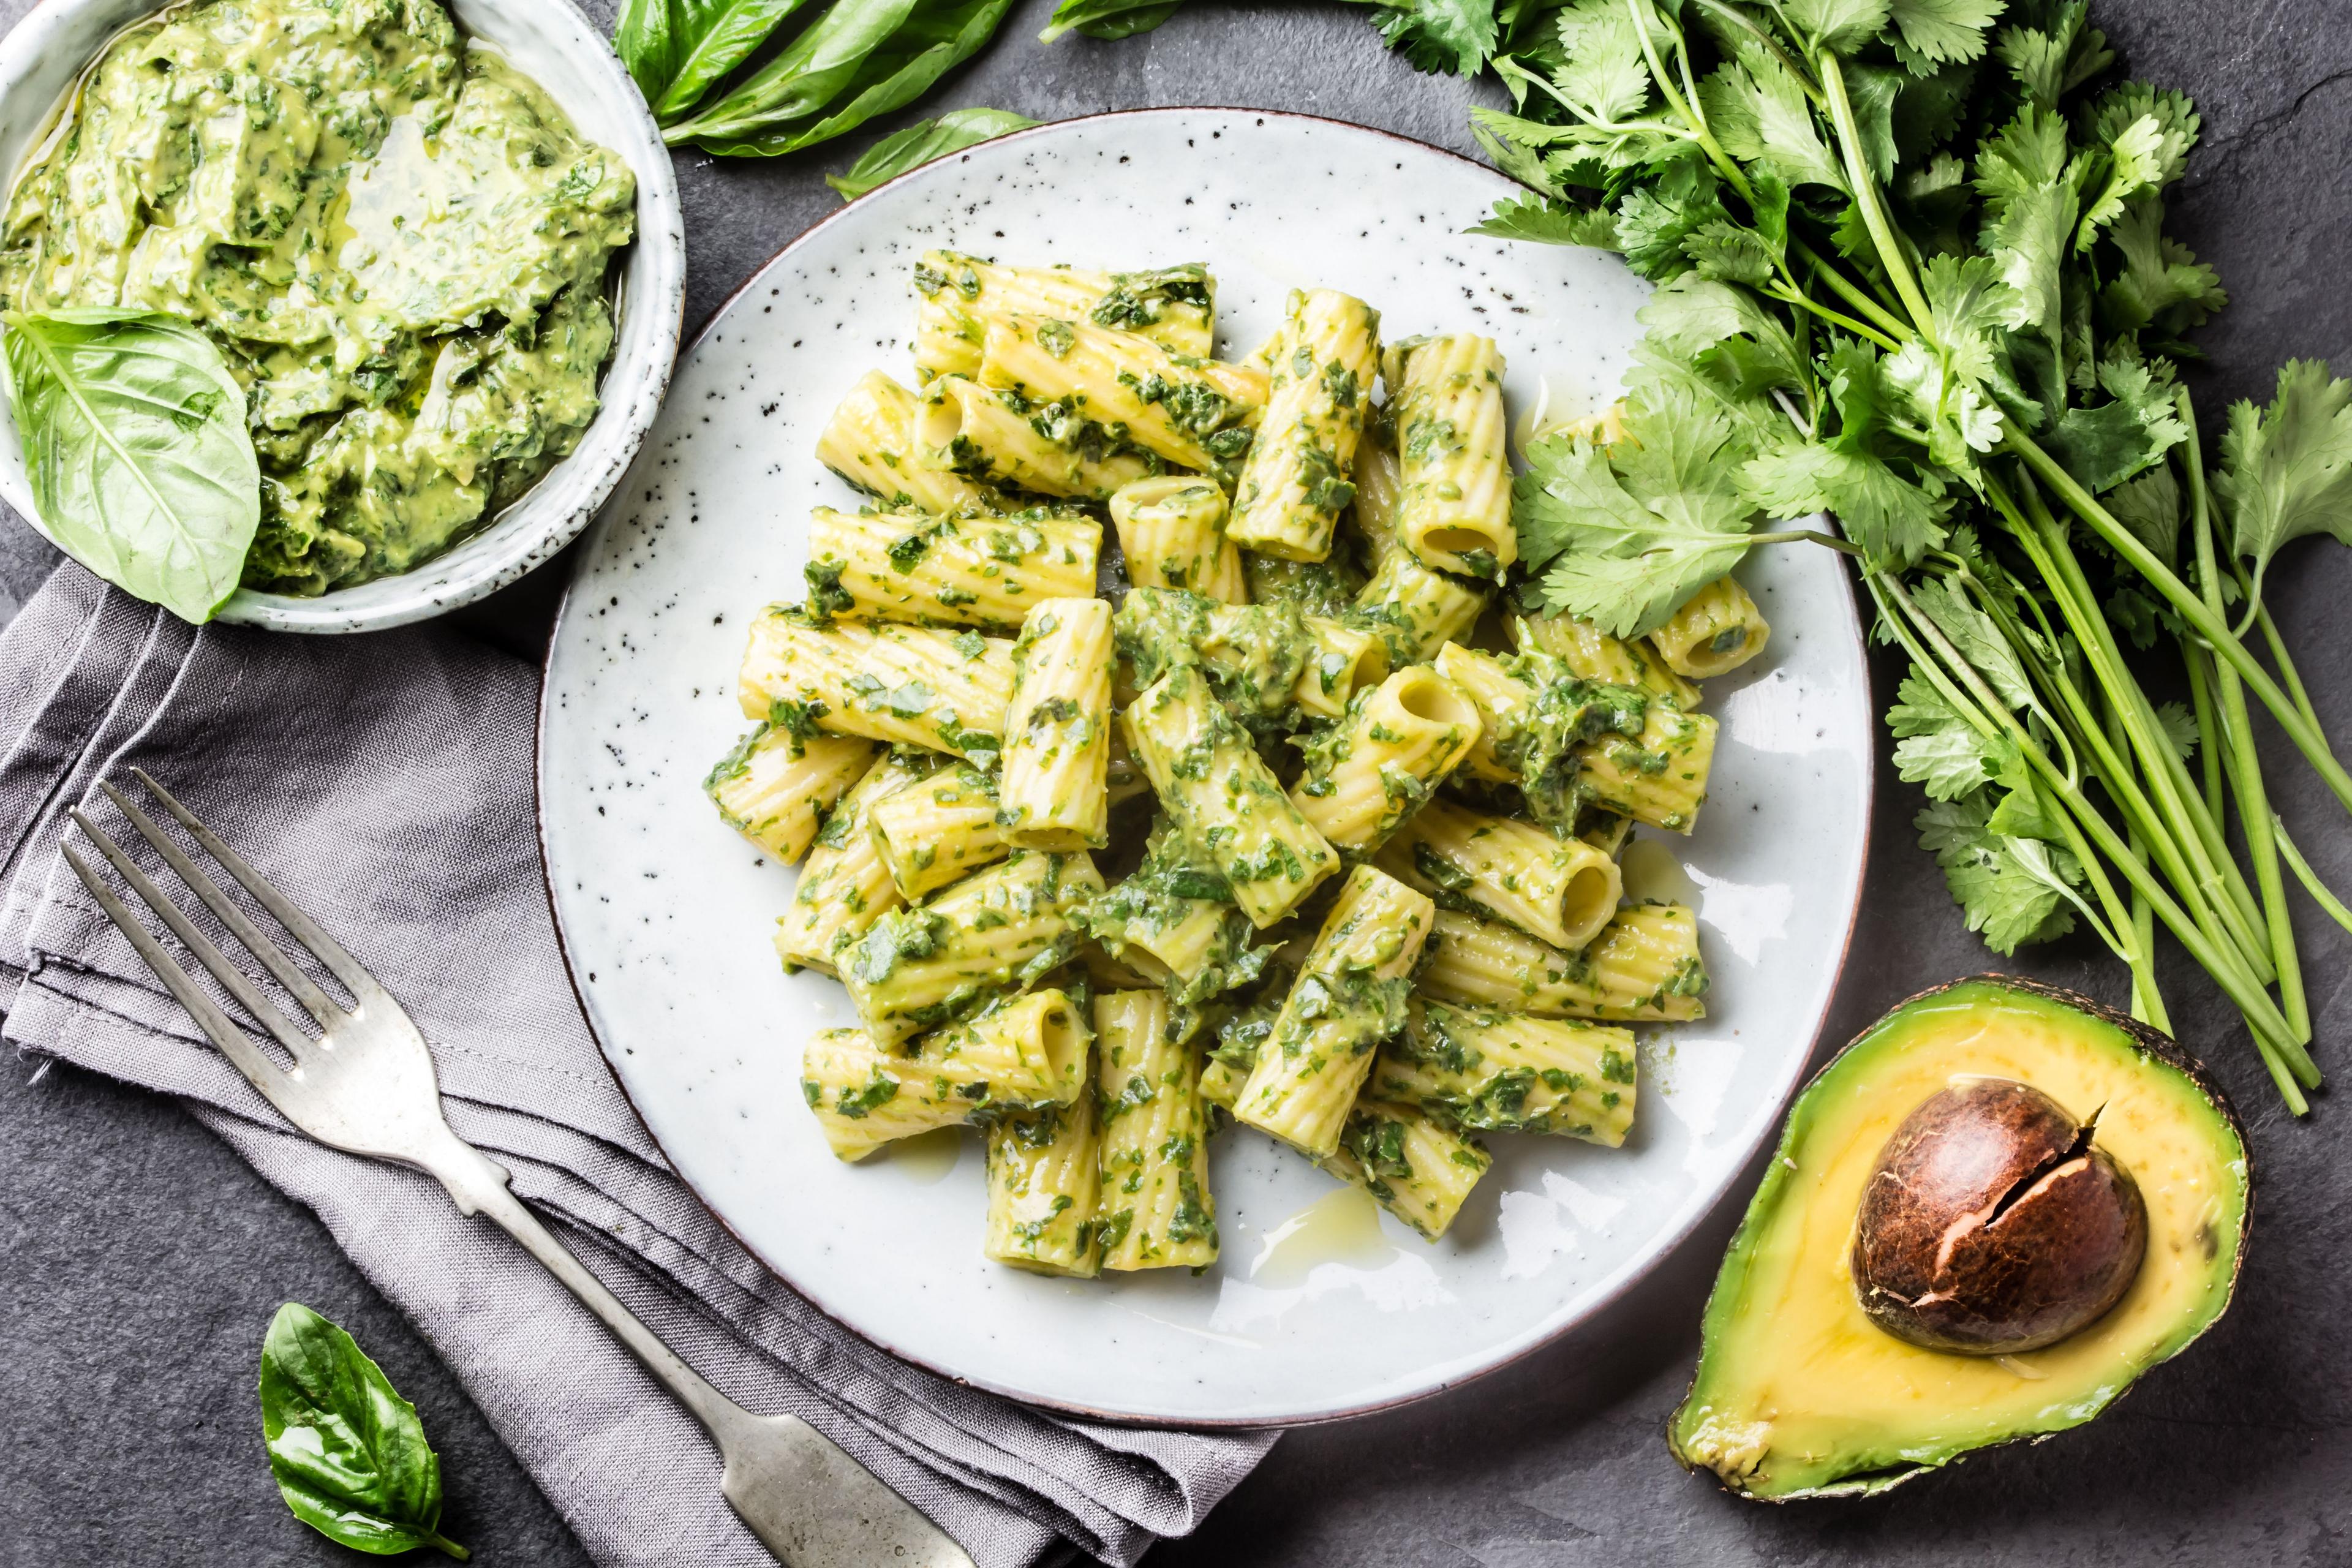 Pasta salad with avocado and mint sauce image